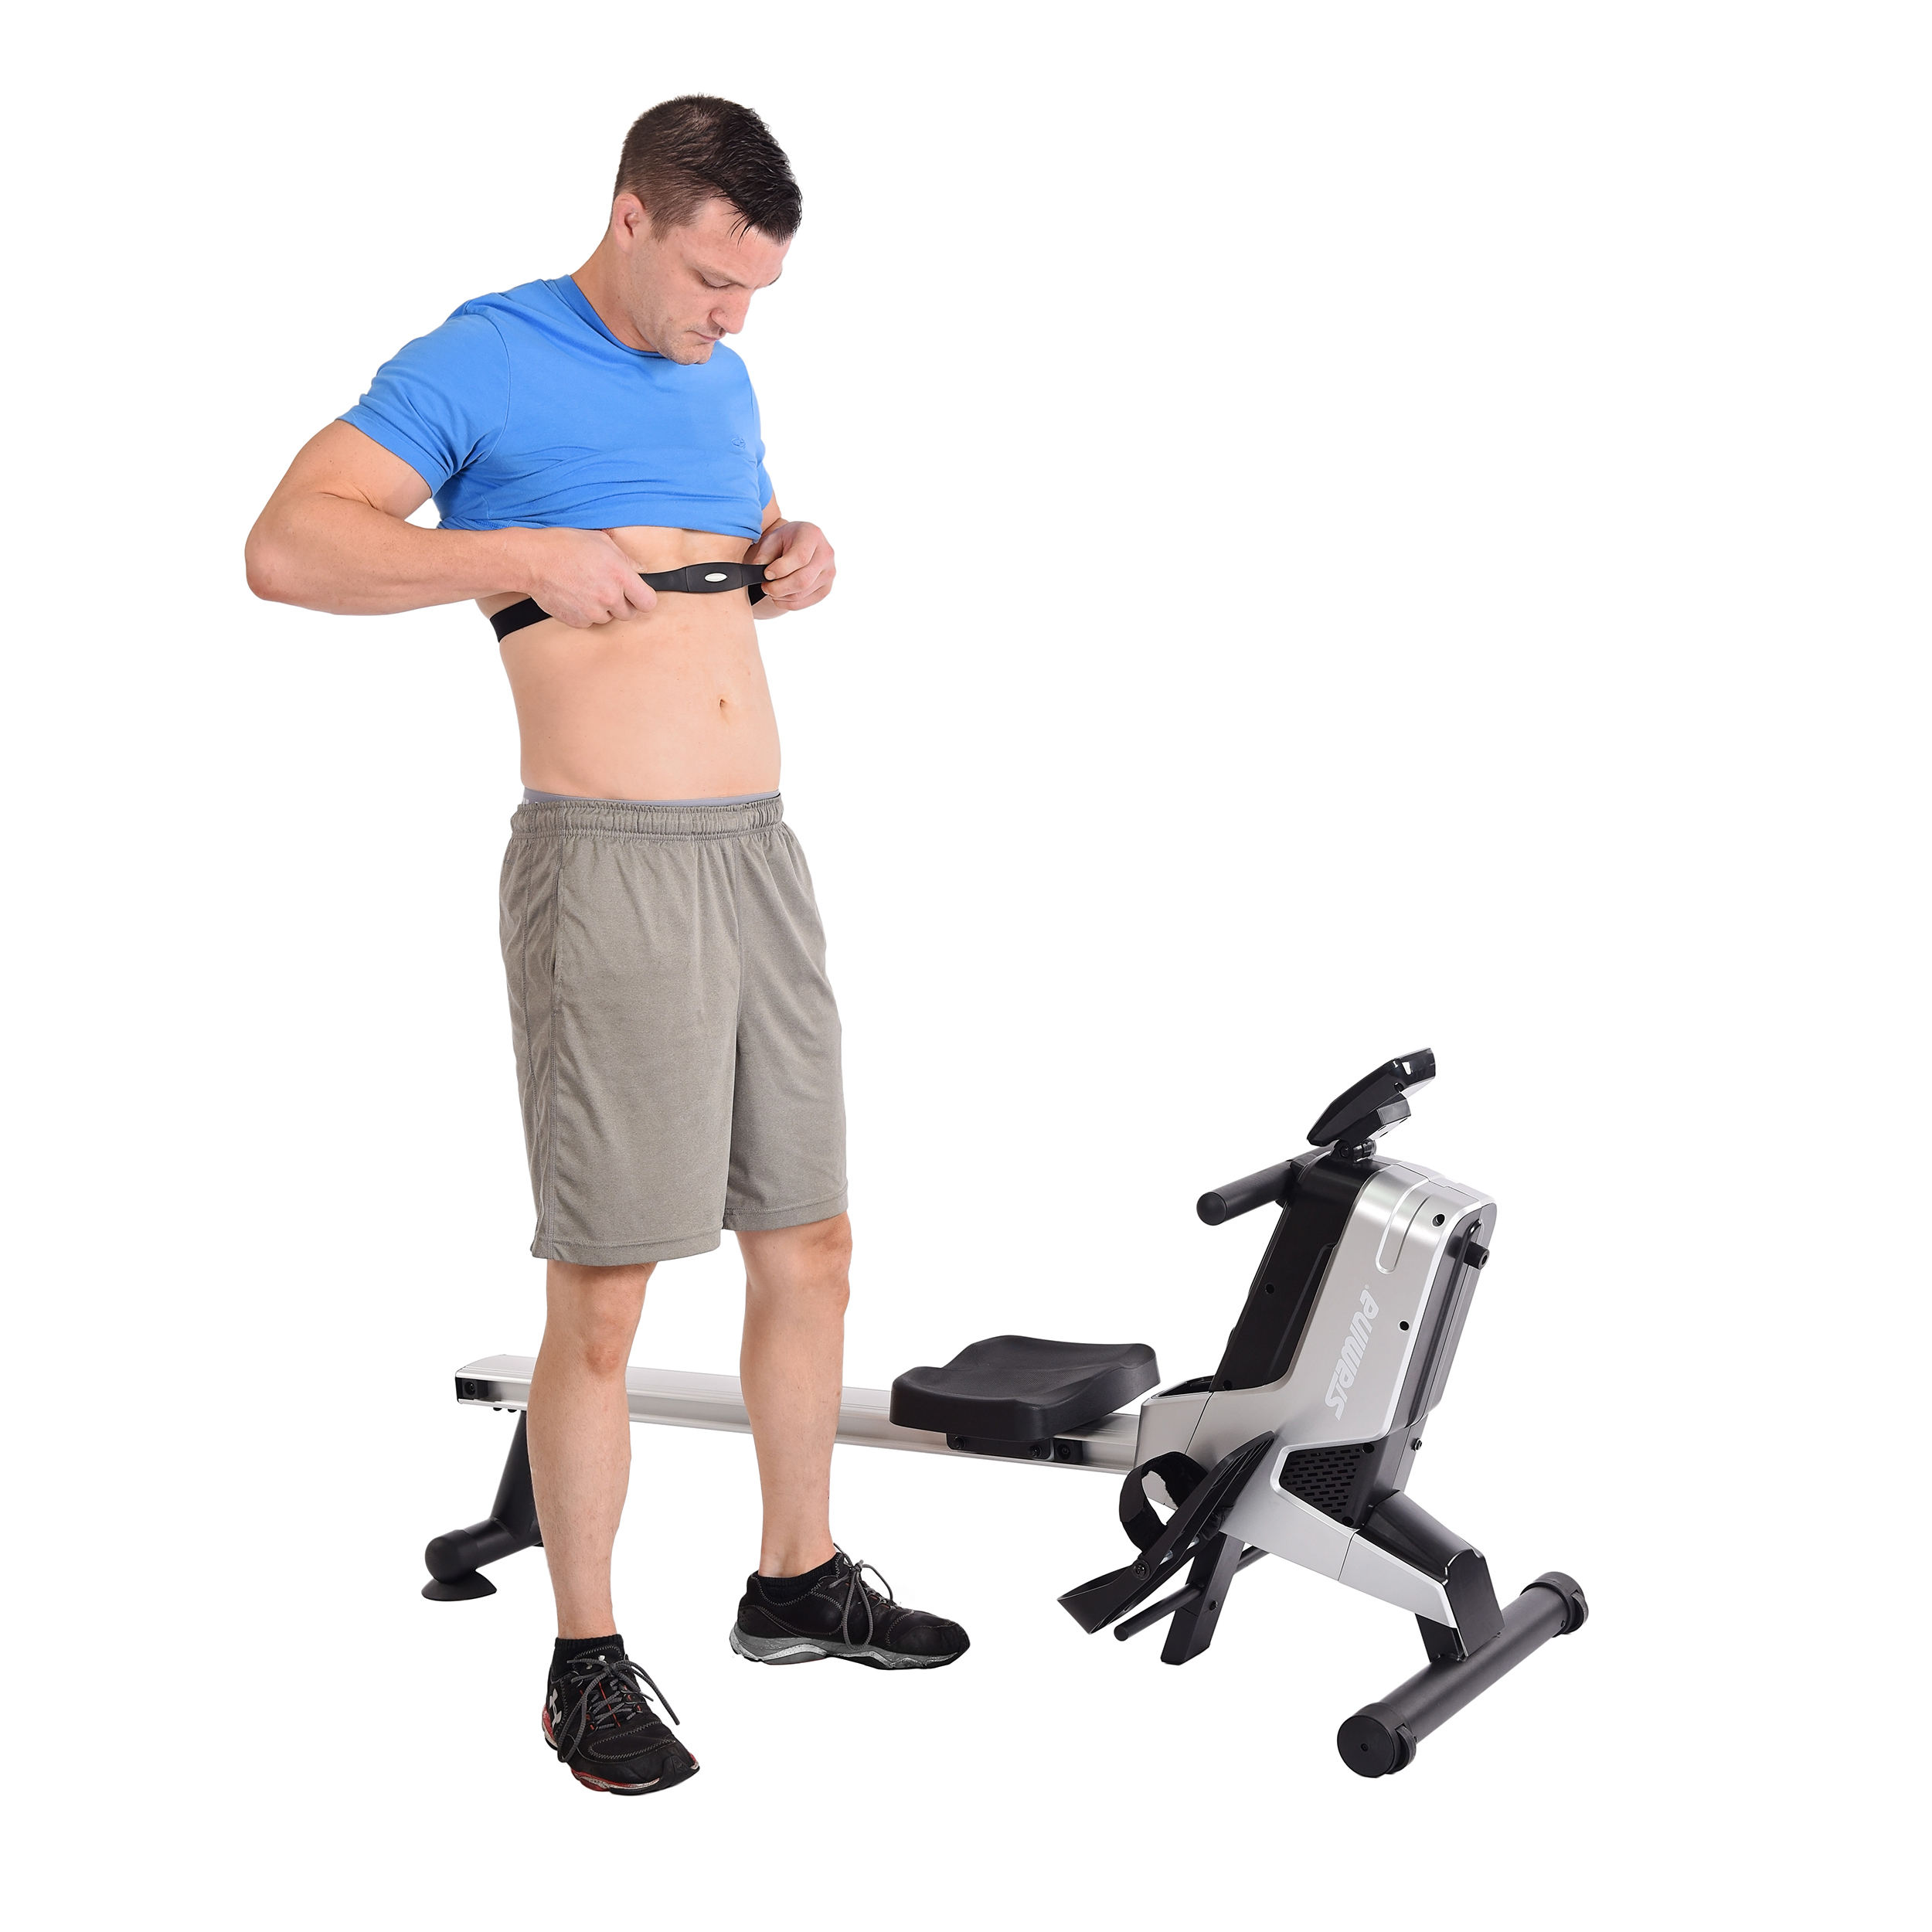 Man wearing heartrate on Stamina Products Rowing Machine 1130 exercise.